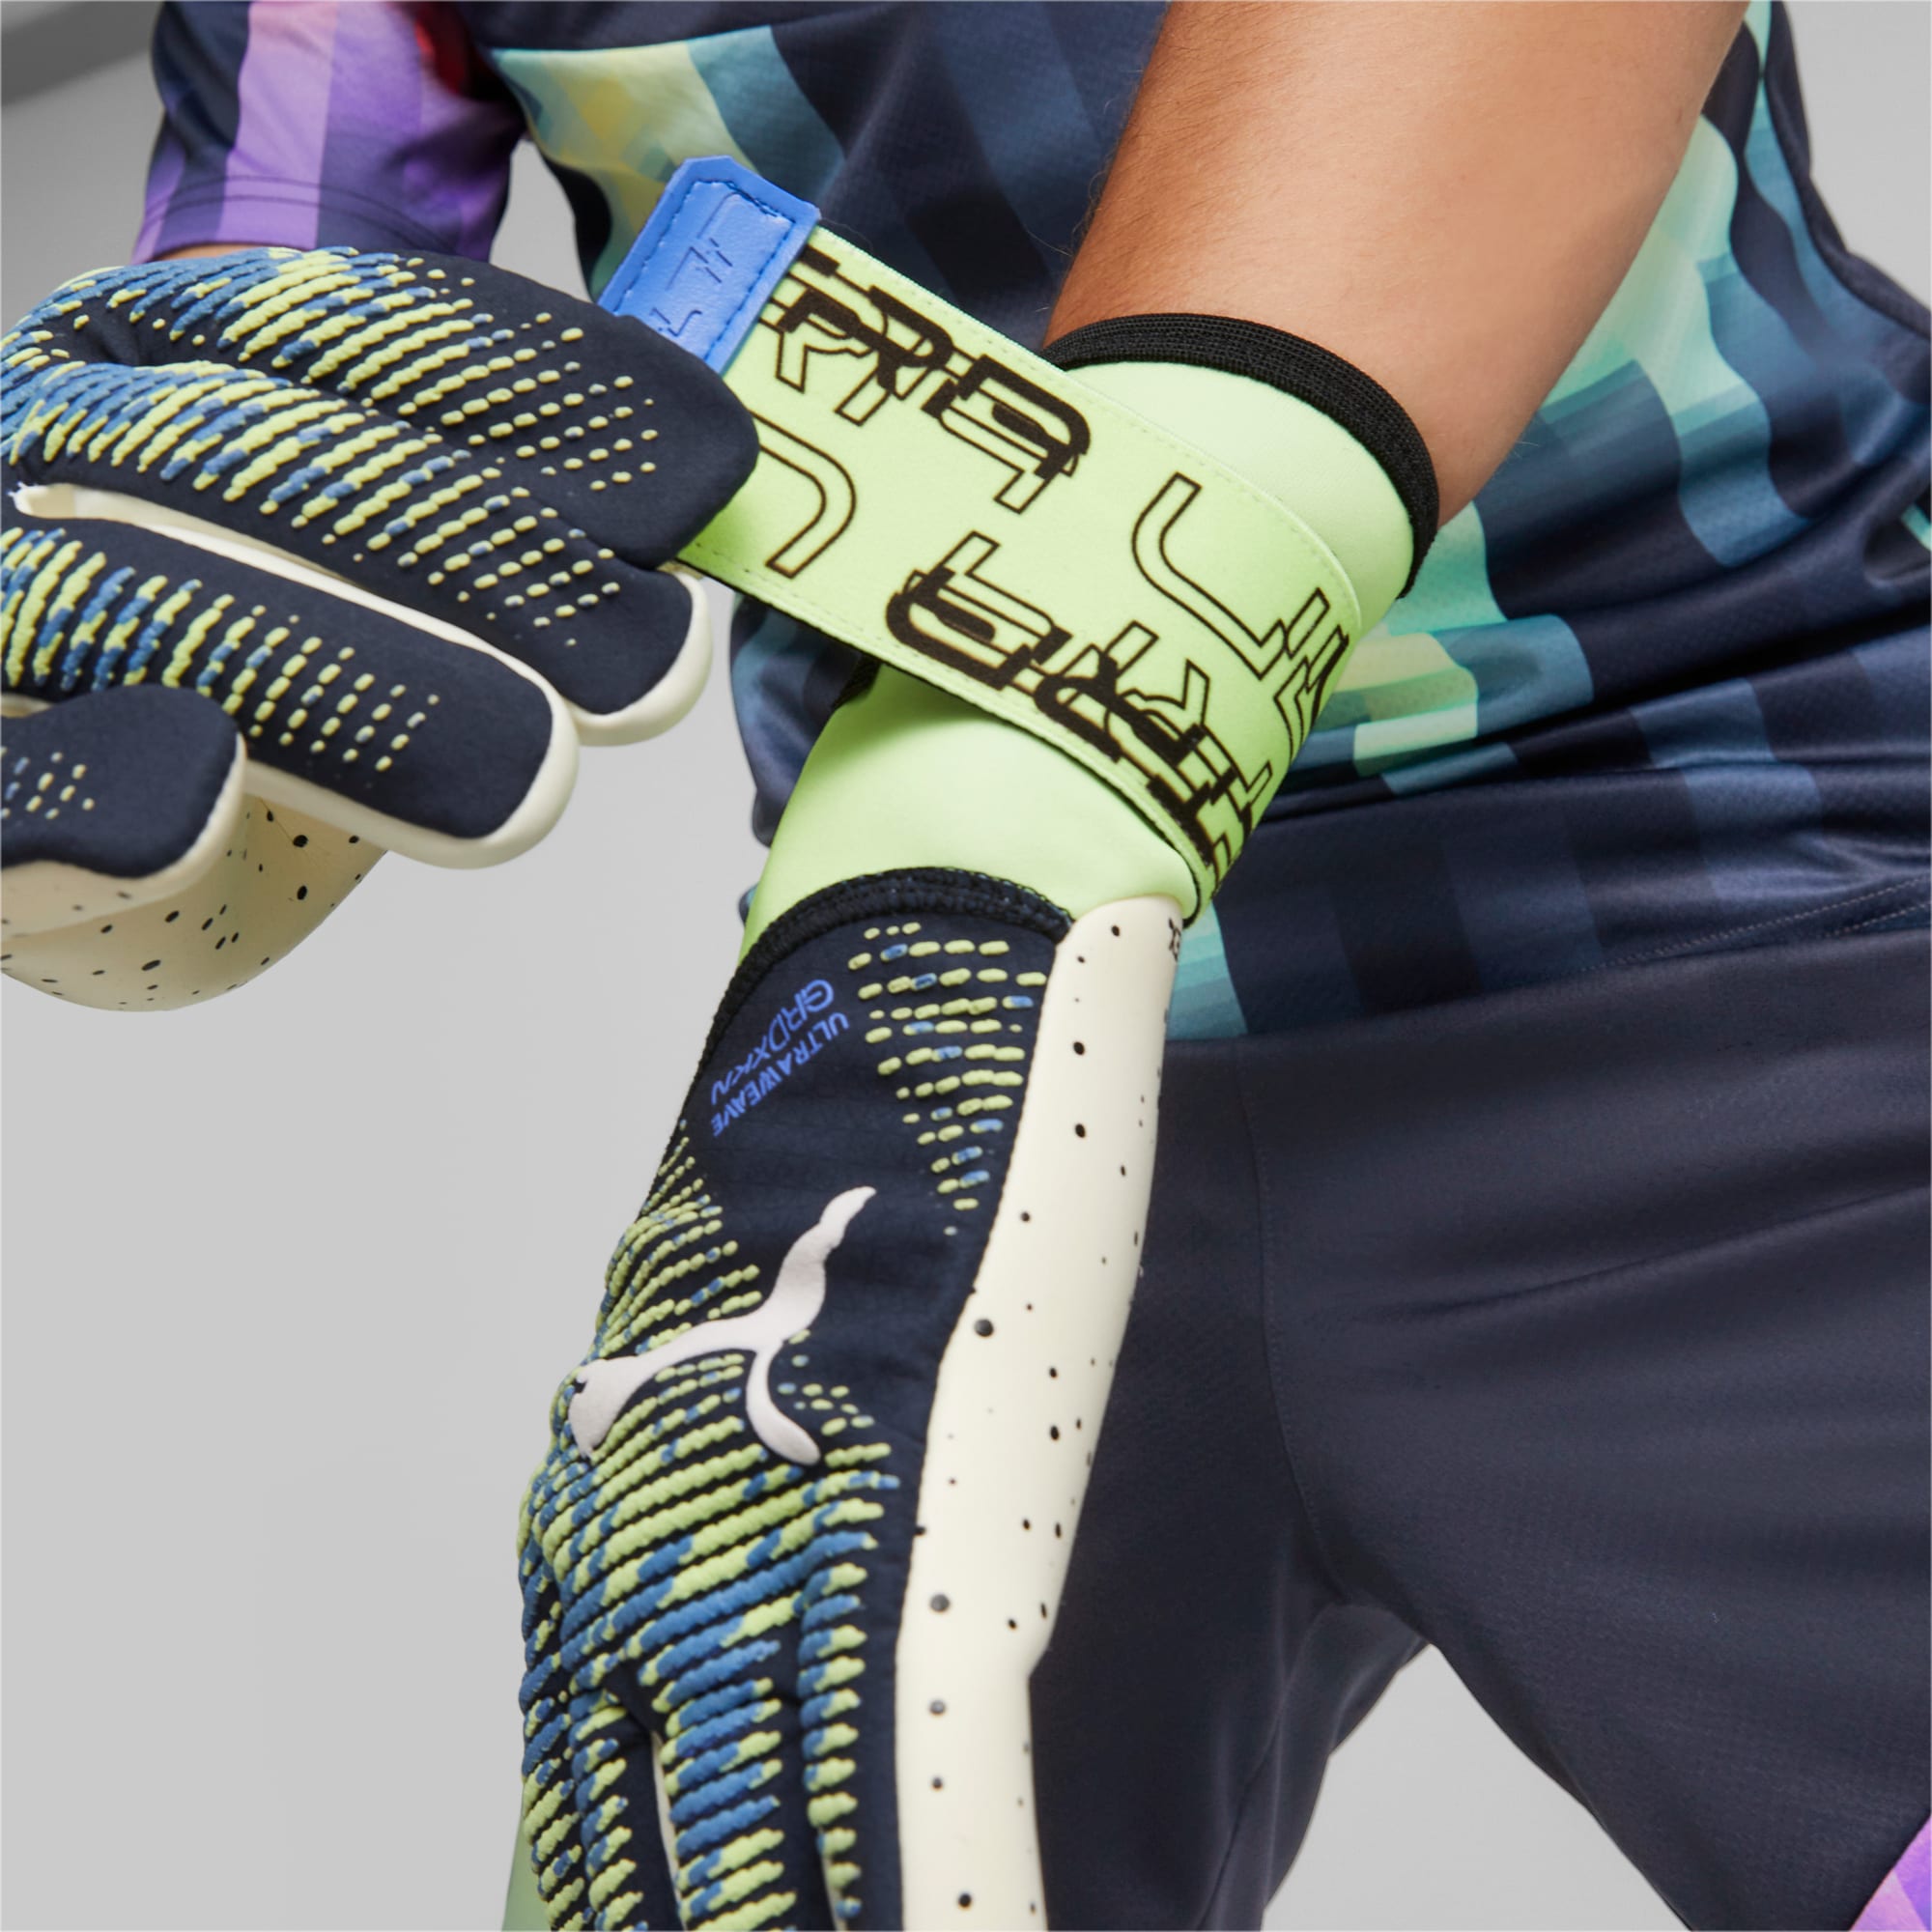 Puma goalkeeper gloves  Current models and special offers